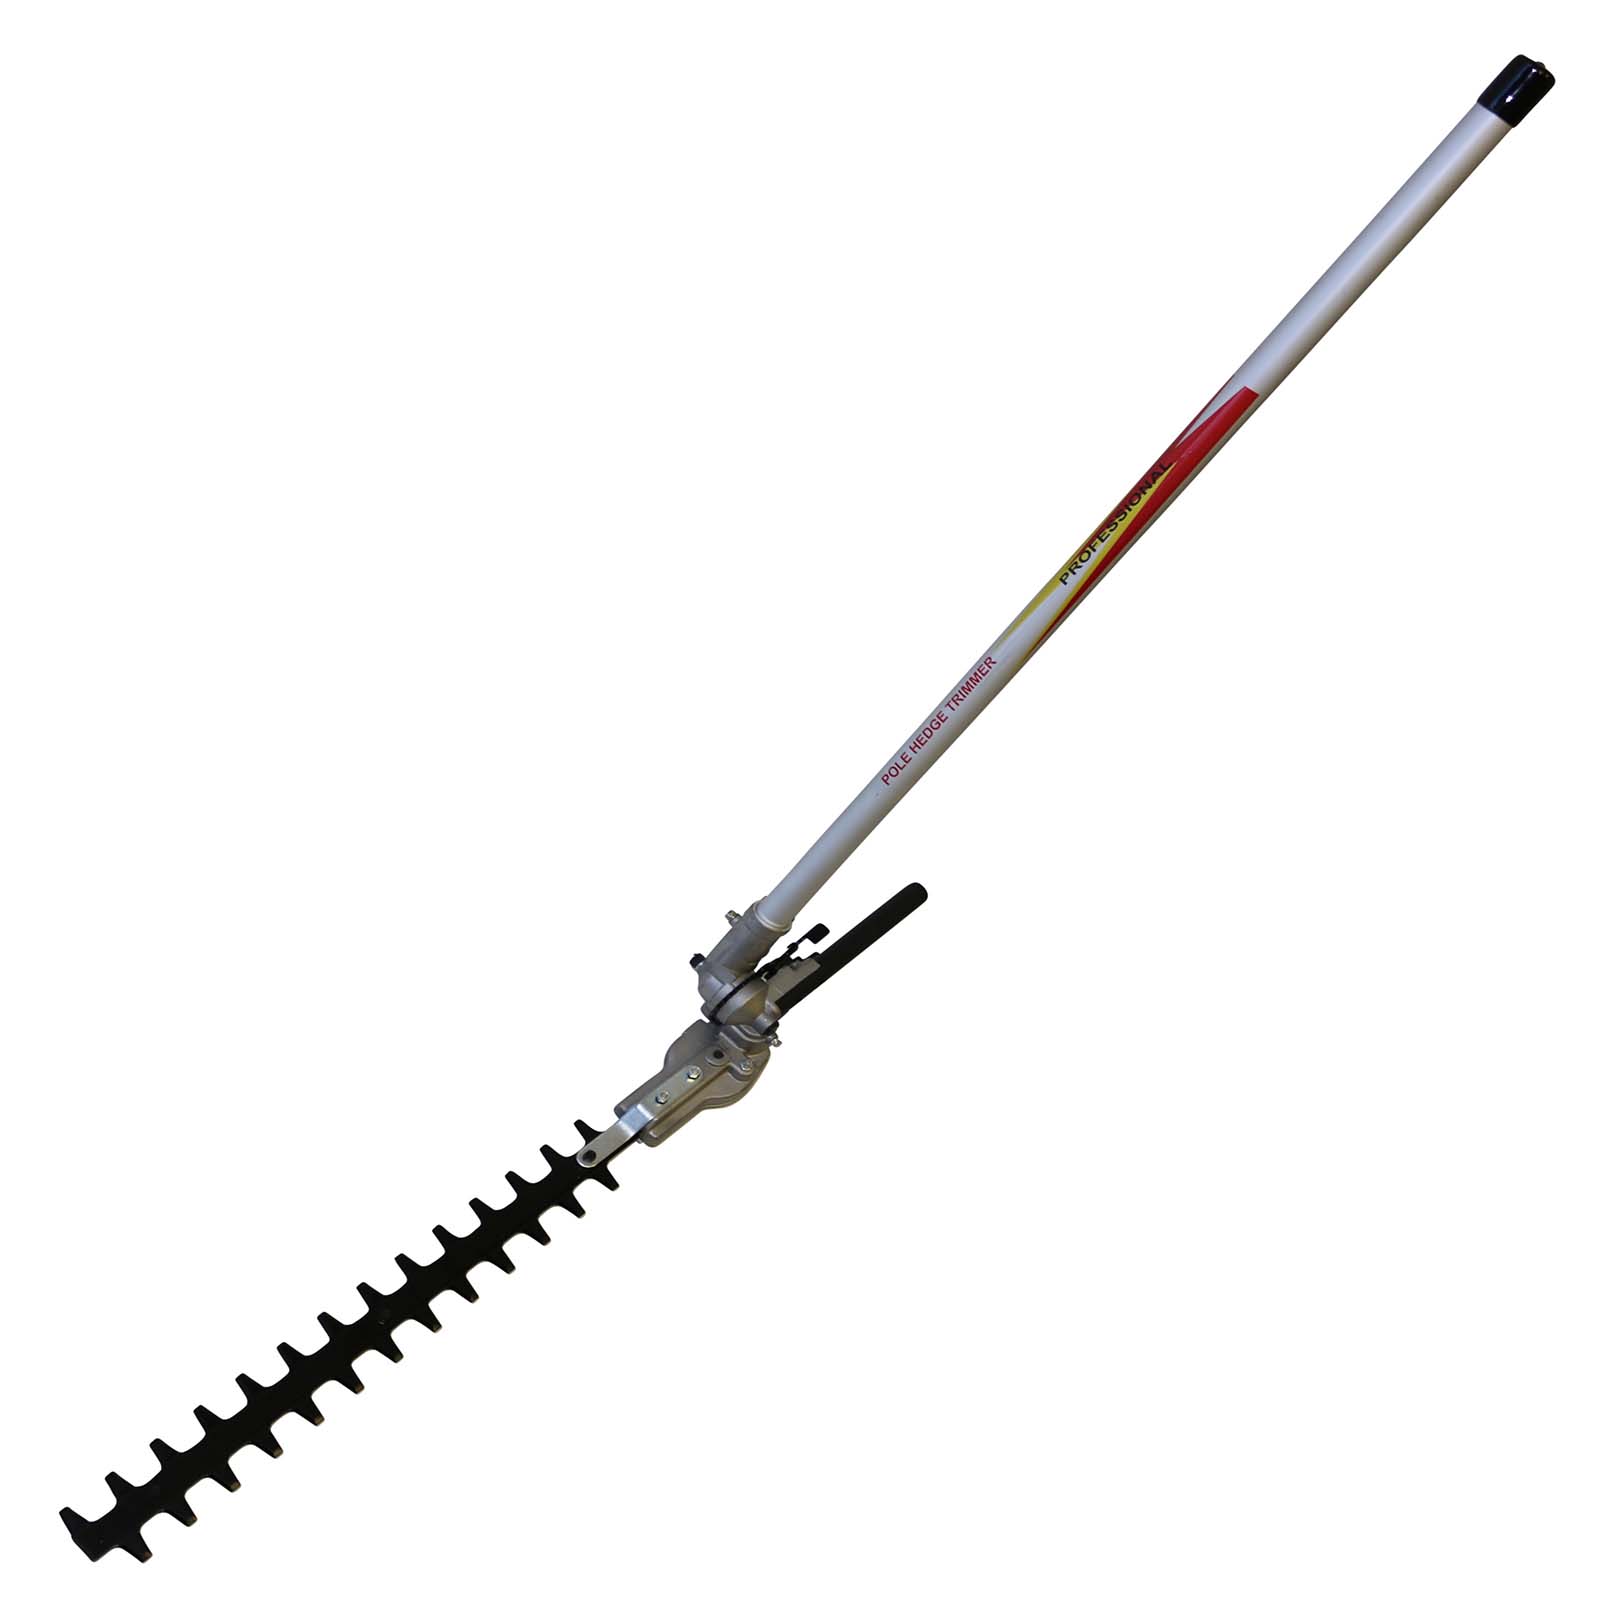 Hedge Trimmer Attachment for Multi Tool Pole Saw Brush Cutter Petrol